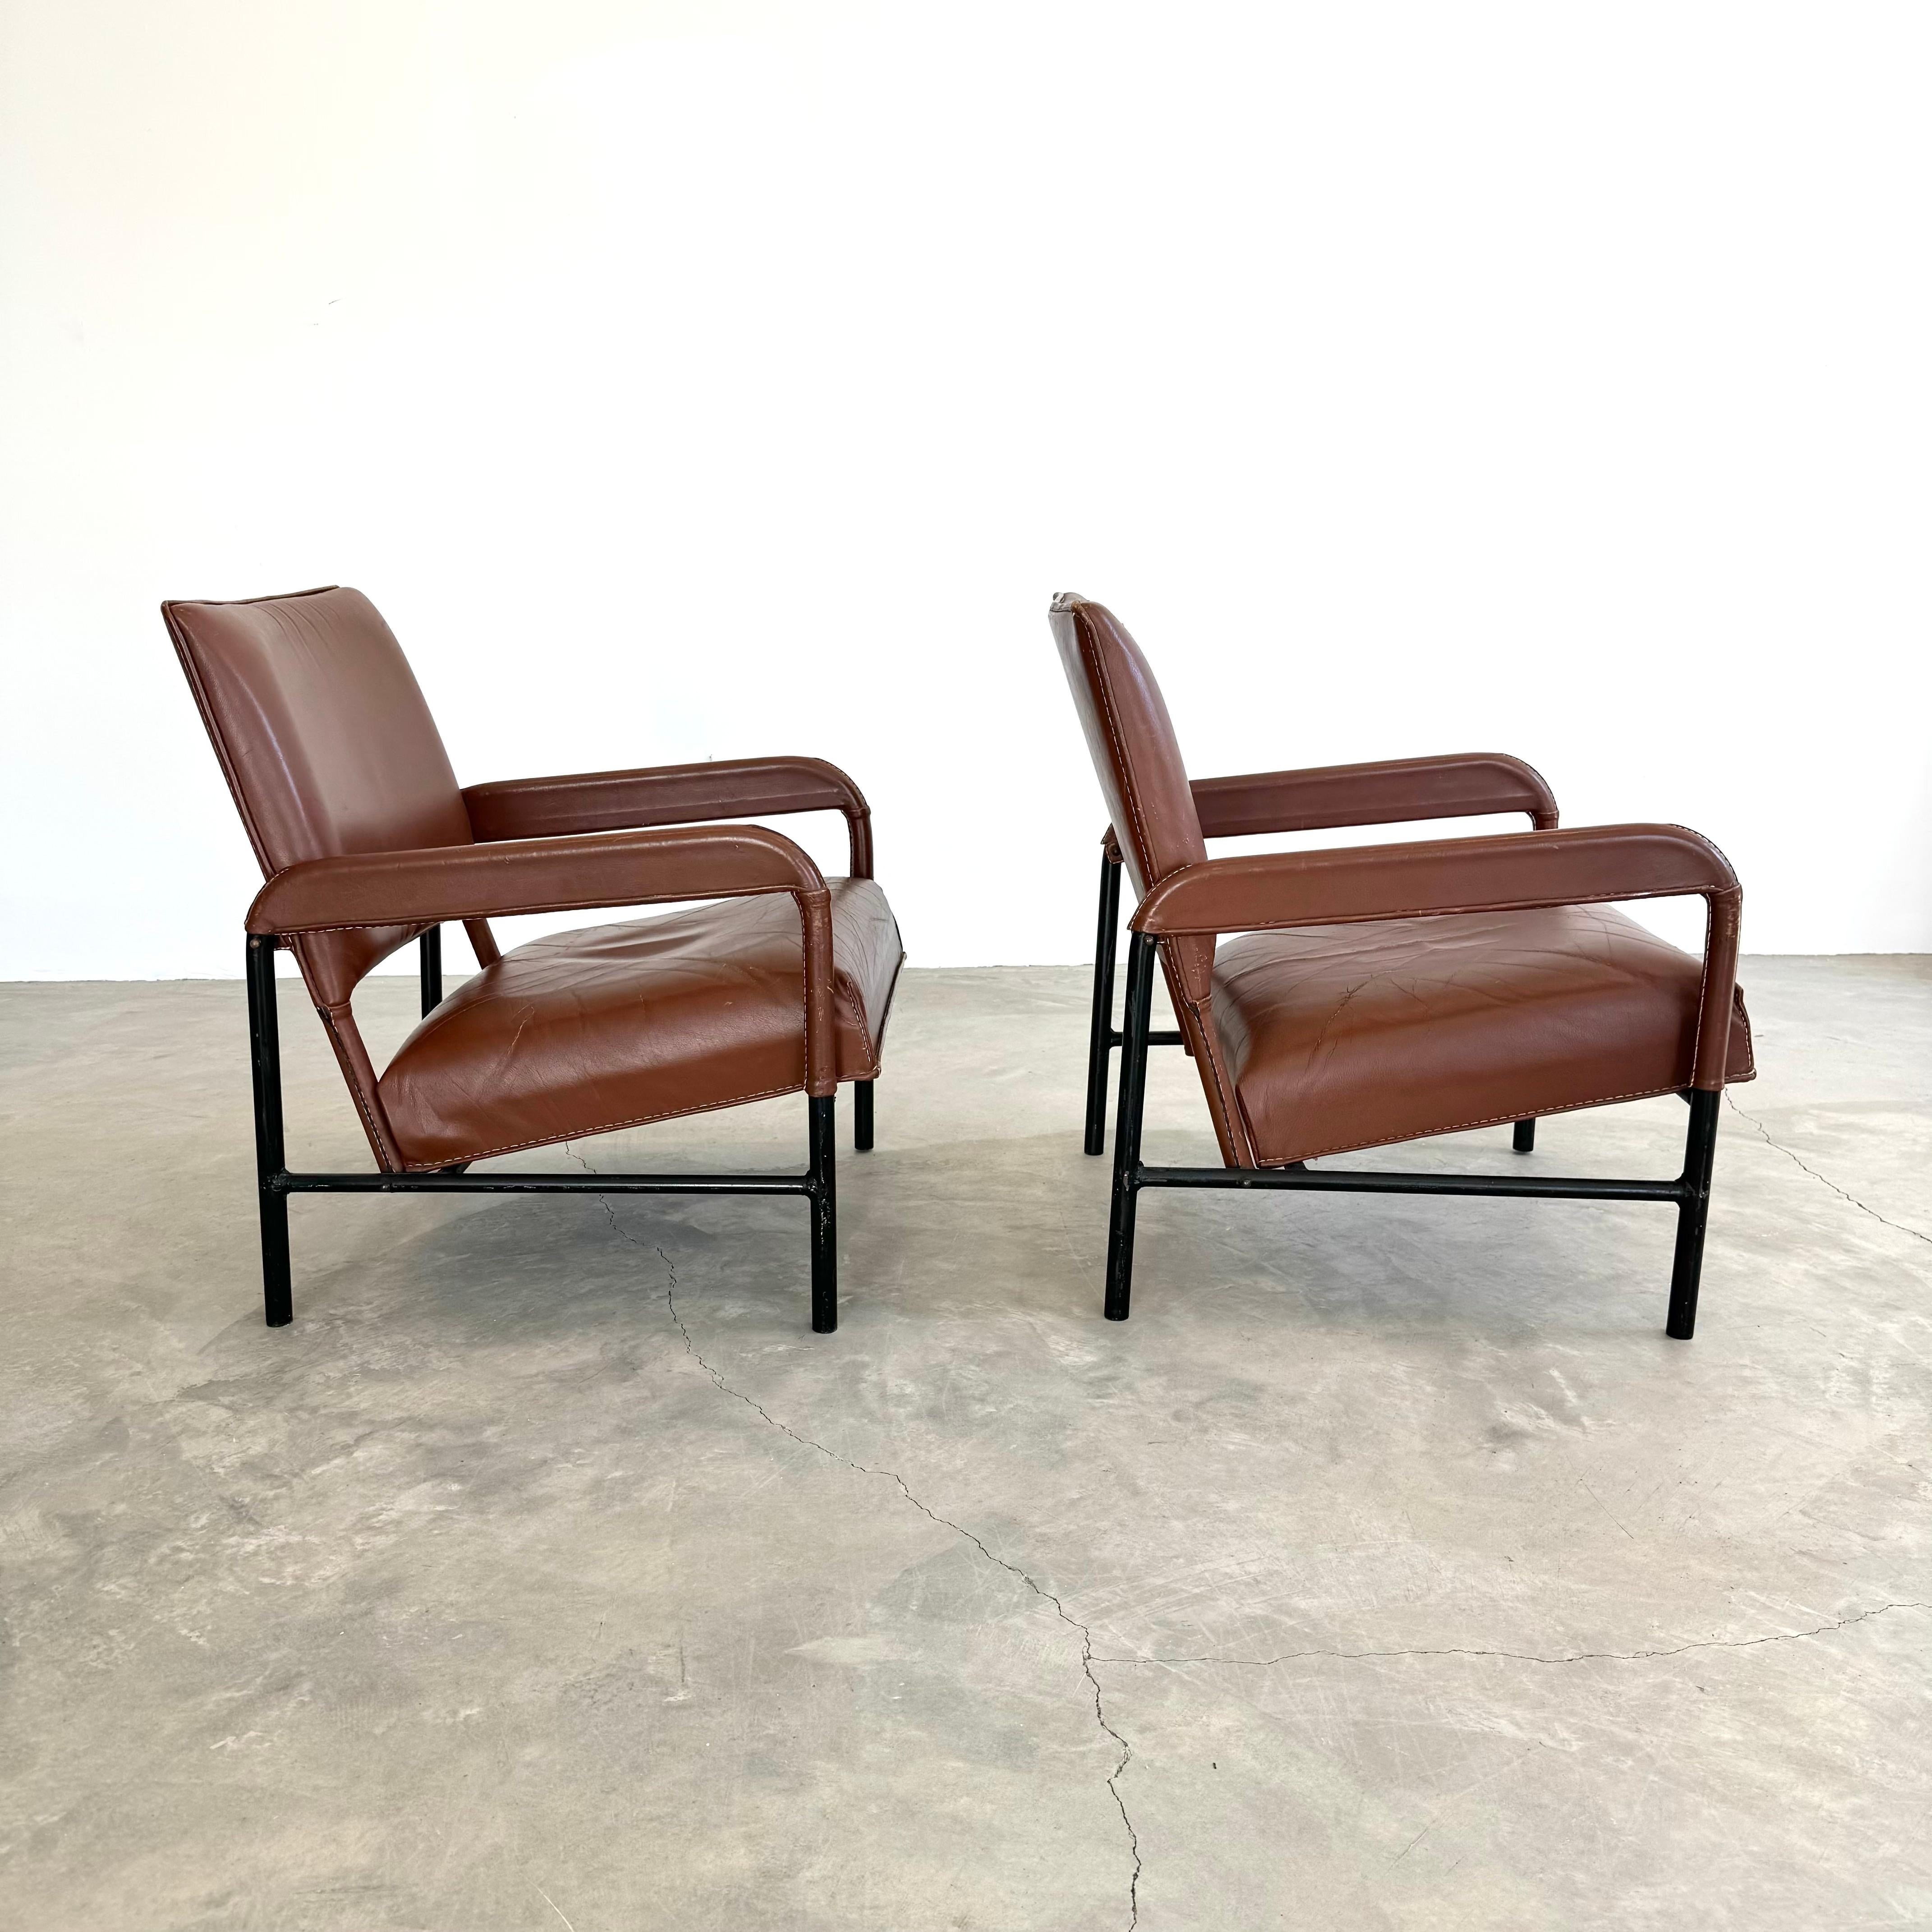 Important pair of armchairs by French designer Jacques Adnet. Heavy, tubular iron frame makes a substantial and grounded seat. Cognac saddle leather with signature Adnet contrast stitching. Thick leather seat bottom and plush leather seat back.